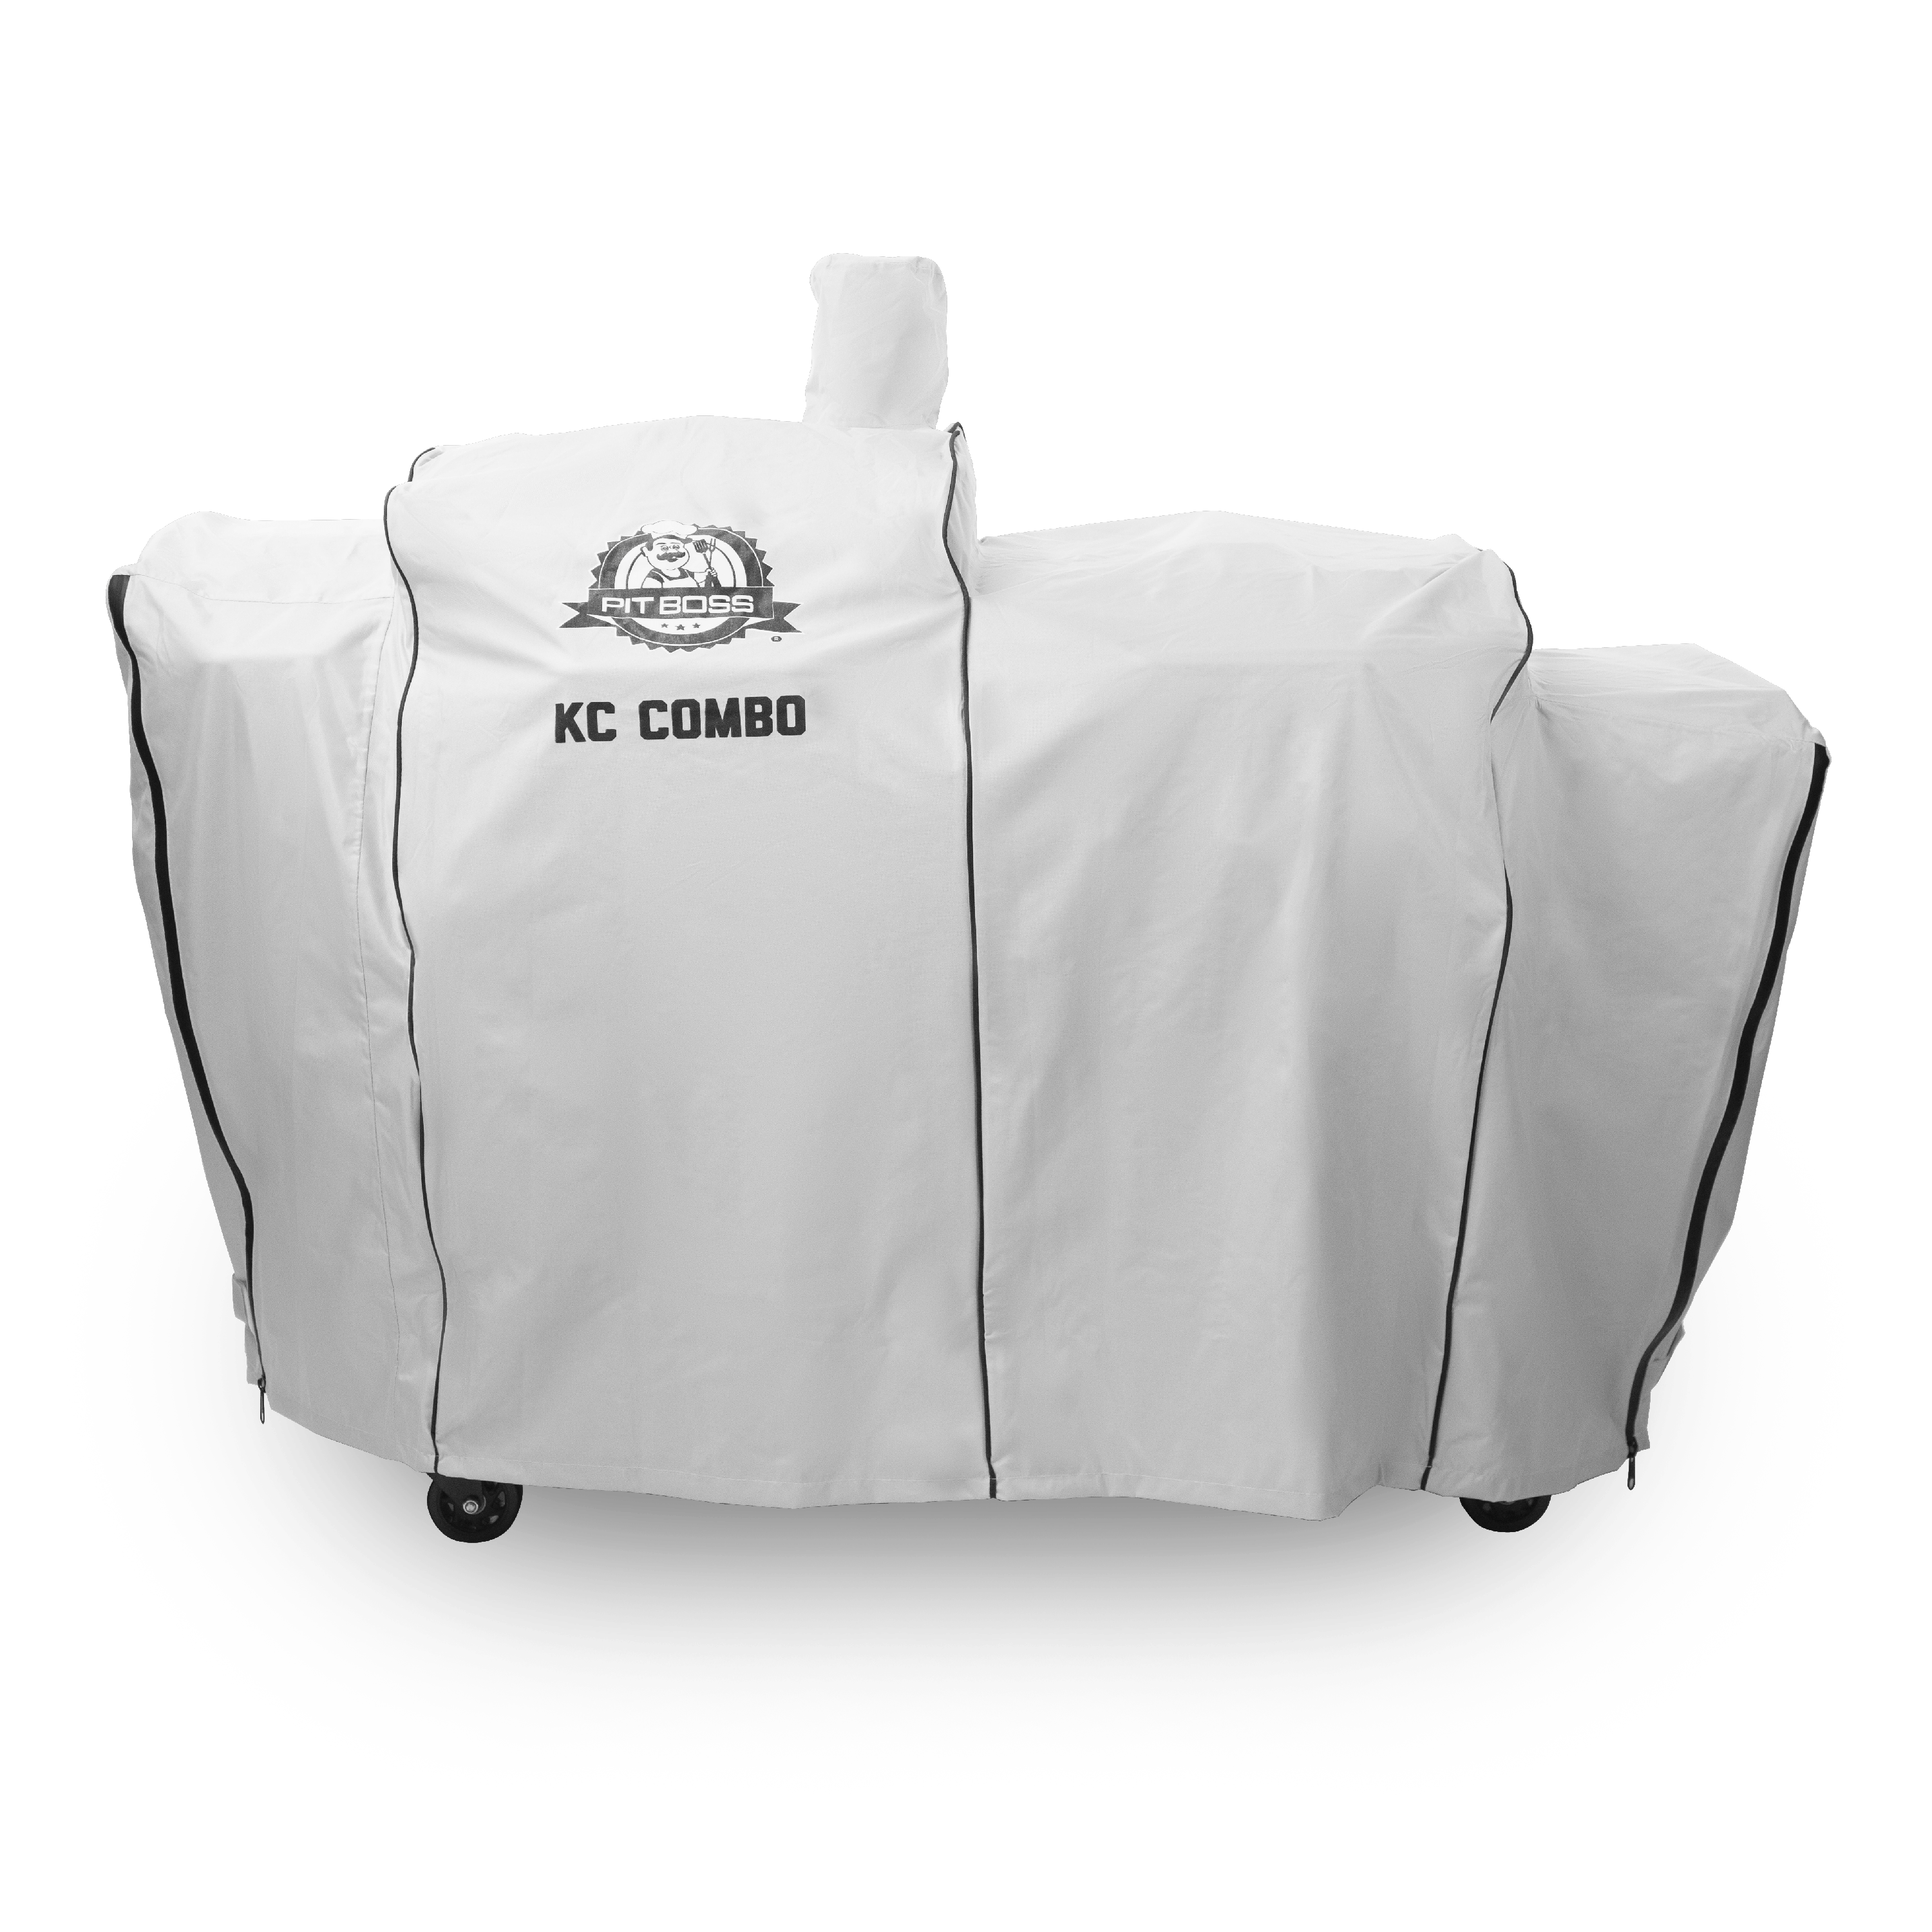 Pit Boss Platinum KC Combo Grill Cover, Fits KC Combo Platinum Grill - image 1 of 12